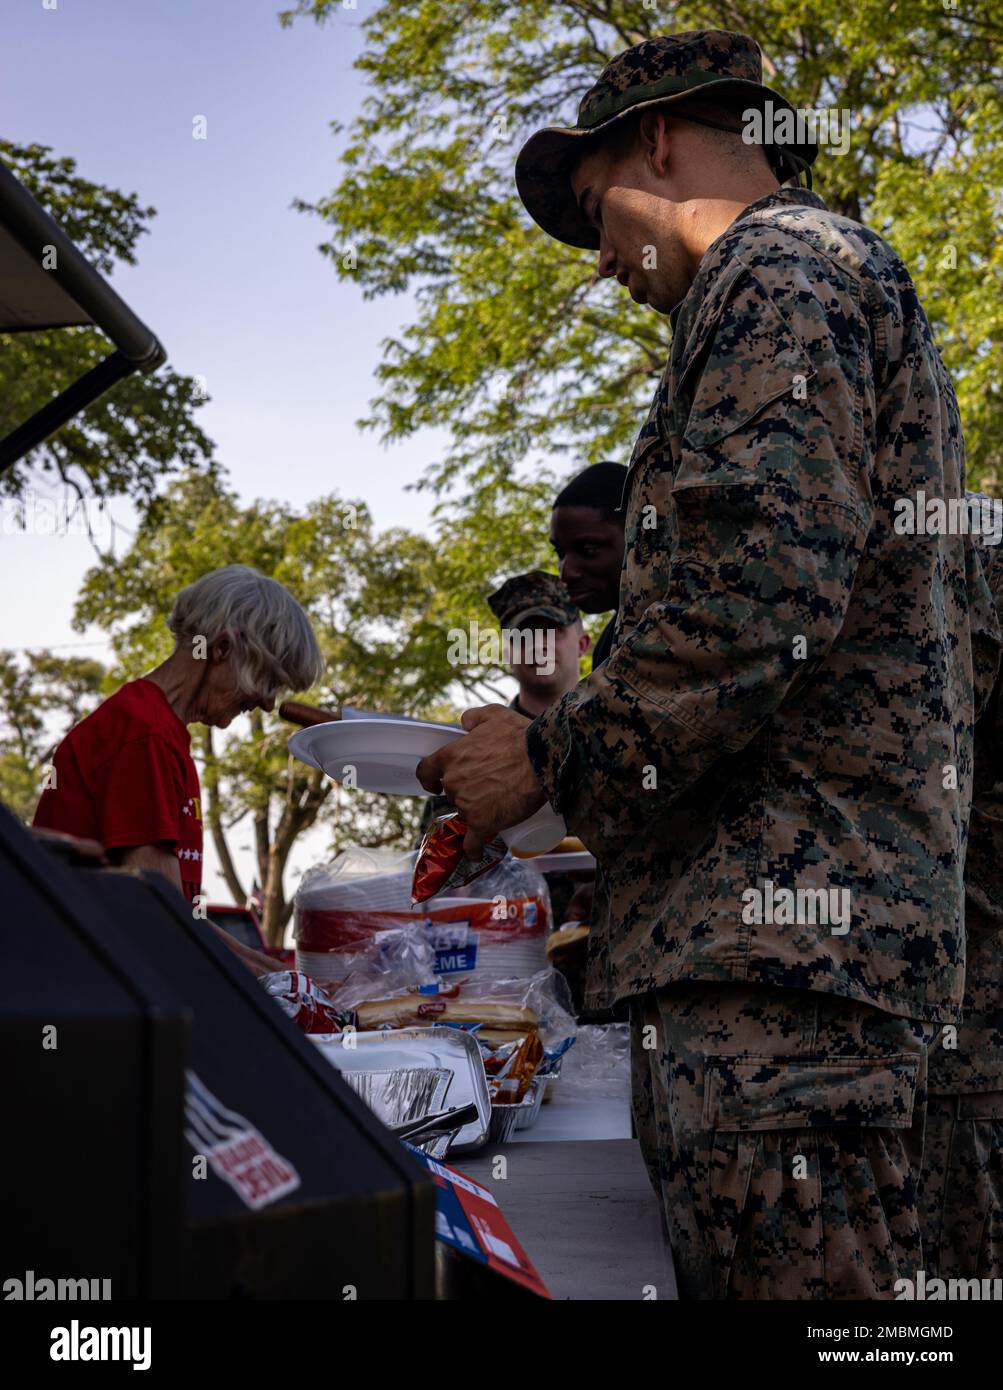 U.S. Marines with Marine Light Attack Helicopter Squadron (HMLA) 773 Detachment A, 4th Marine Aircraft Wing, line up for food provided by Veterans of Foreign Wars (VFW) Post 1432 during exercise Gunslinger 22 at Salina, Kansas on June 17, 2022. The VFW traces its roots back to 1899 when veterans of the Spanish-American War (1898) and the Philippine Insurrection (1899-1902) founded local organizations to secure rights and benefits for their service. Stock Photo